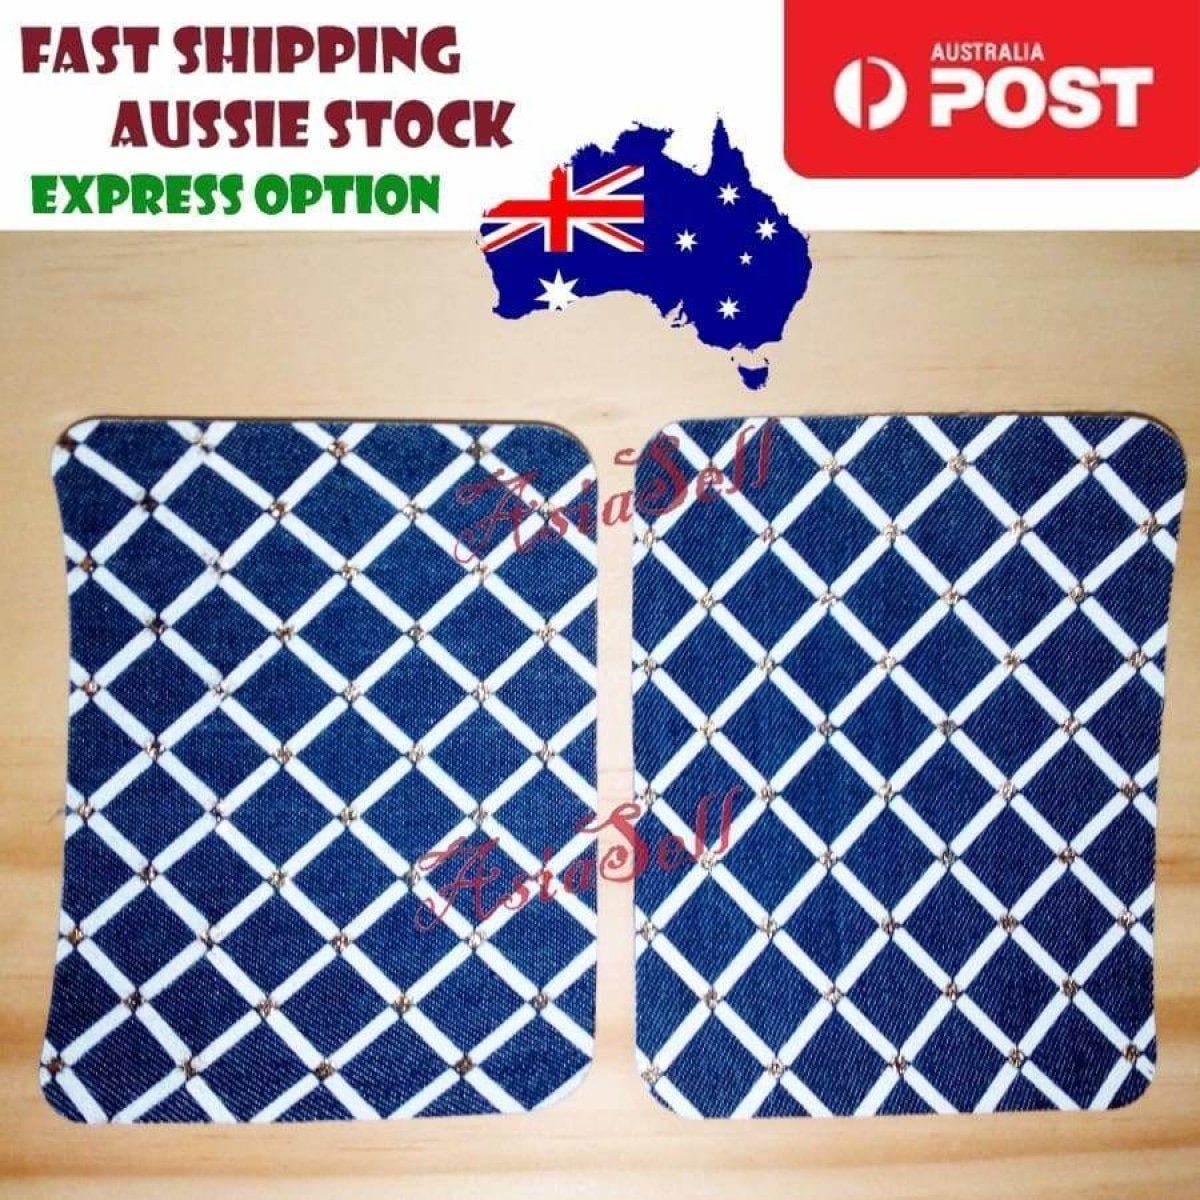 2pcs Iron-on Blue Black Patterned Clothing Patch Pattern Fabric Repair Denim Jacket Jeans - Criss Cross - - Asia Sell